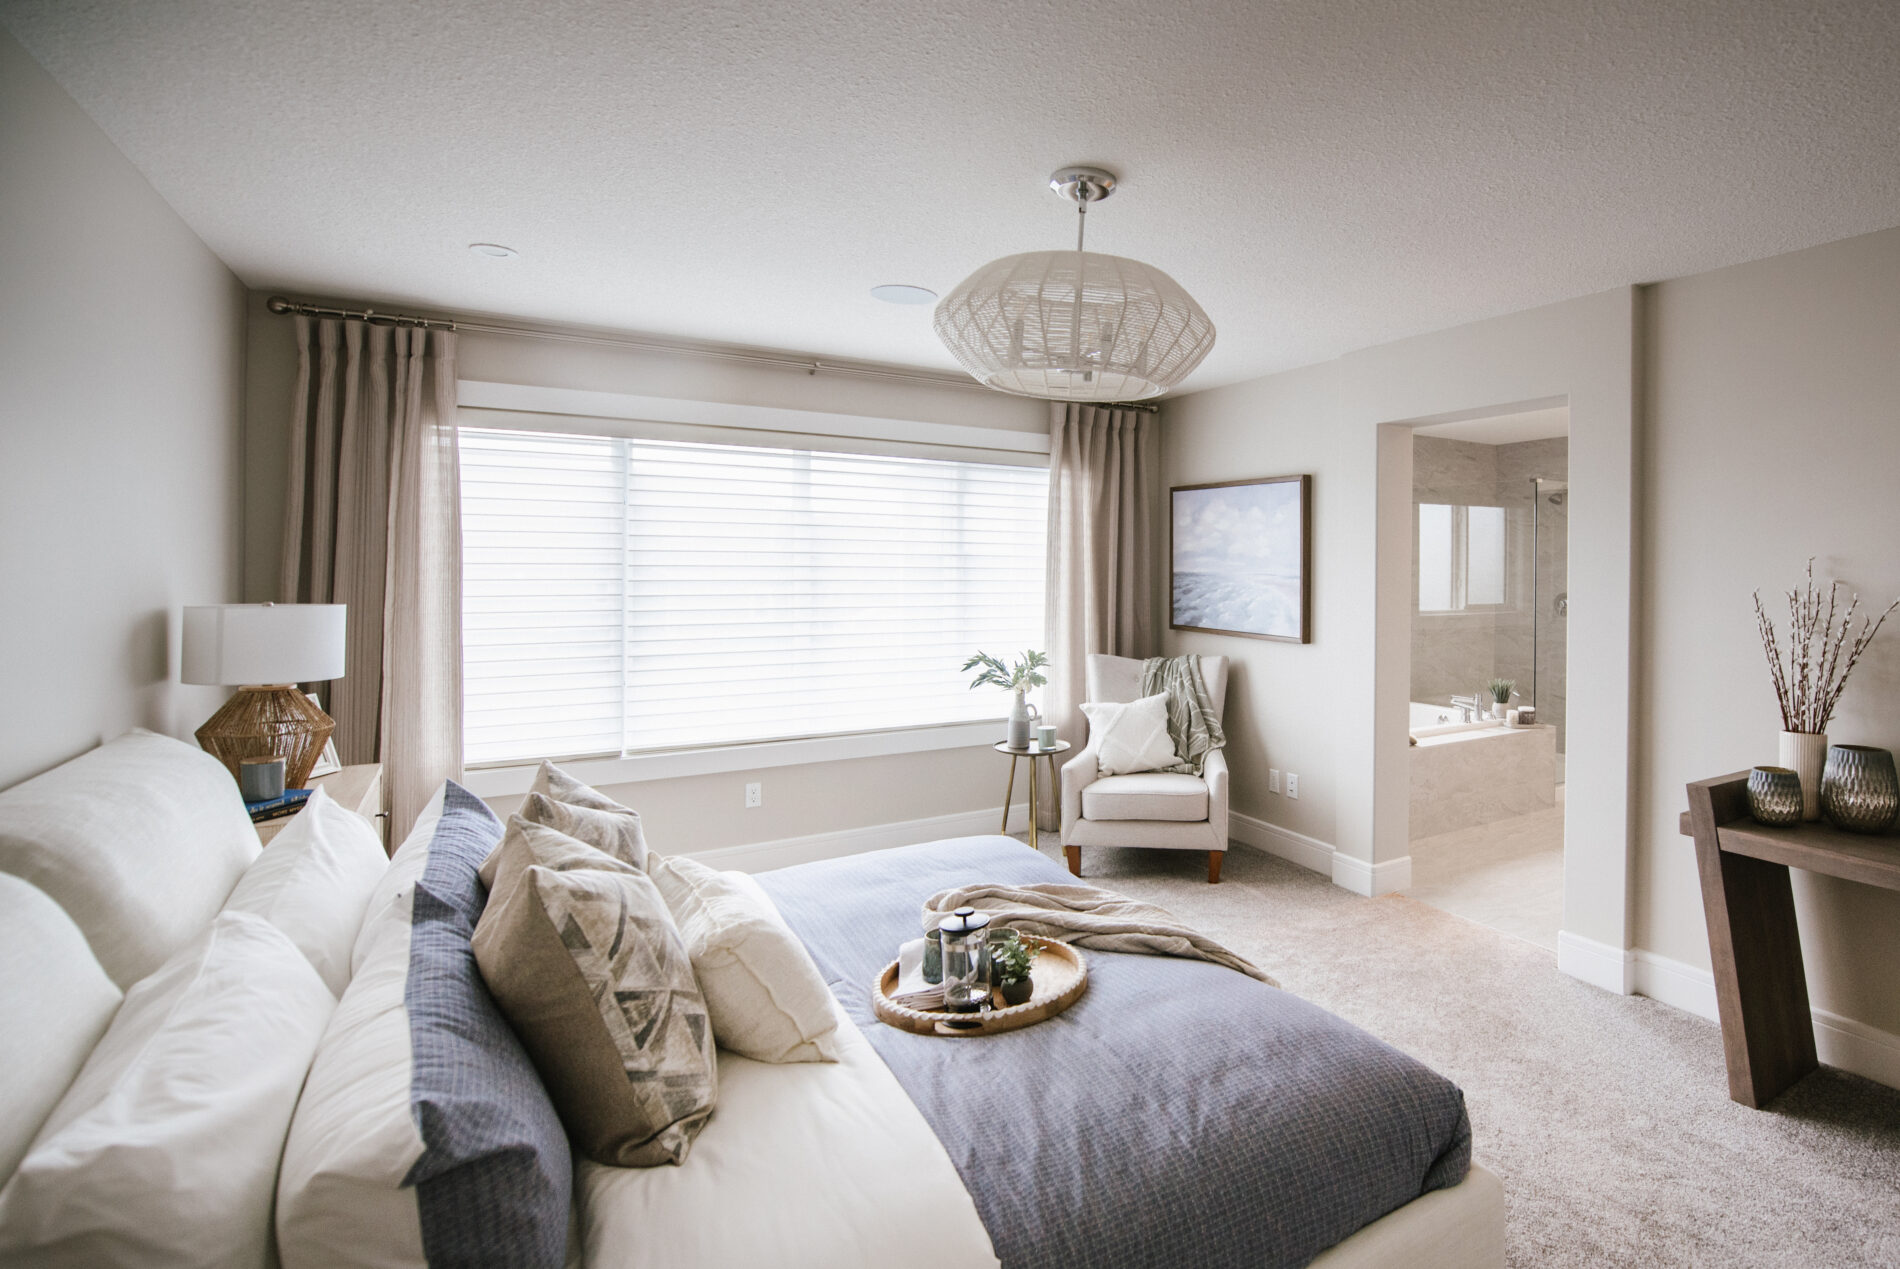 The calm, large master bedroom in the Kalliope showhome with warm grey bedding, a natural central light fixtures and a chair and small table in the corner